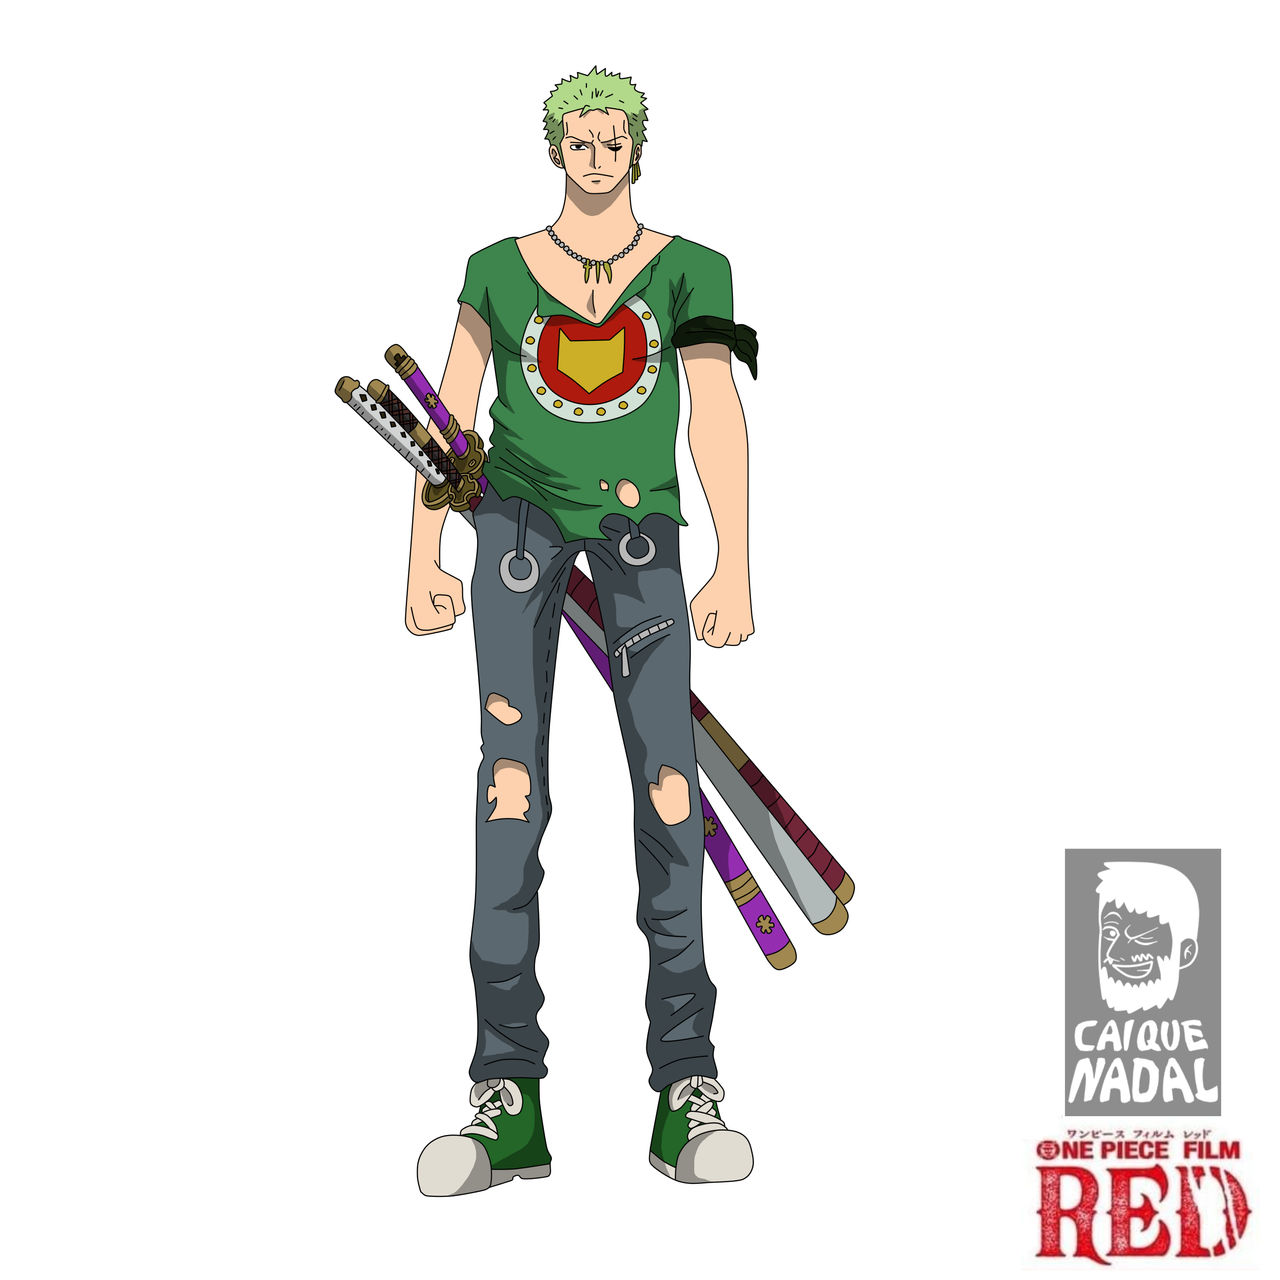 Roronoa Zoro - RED Movie - One Piece by caiquenadal on DeviantArt